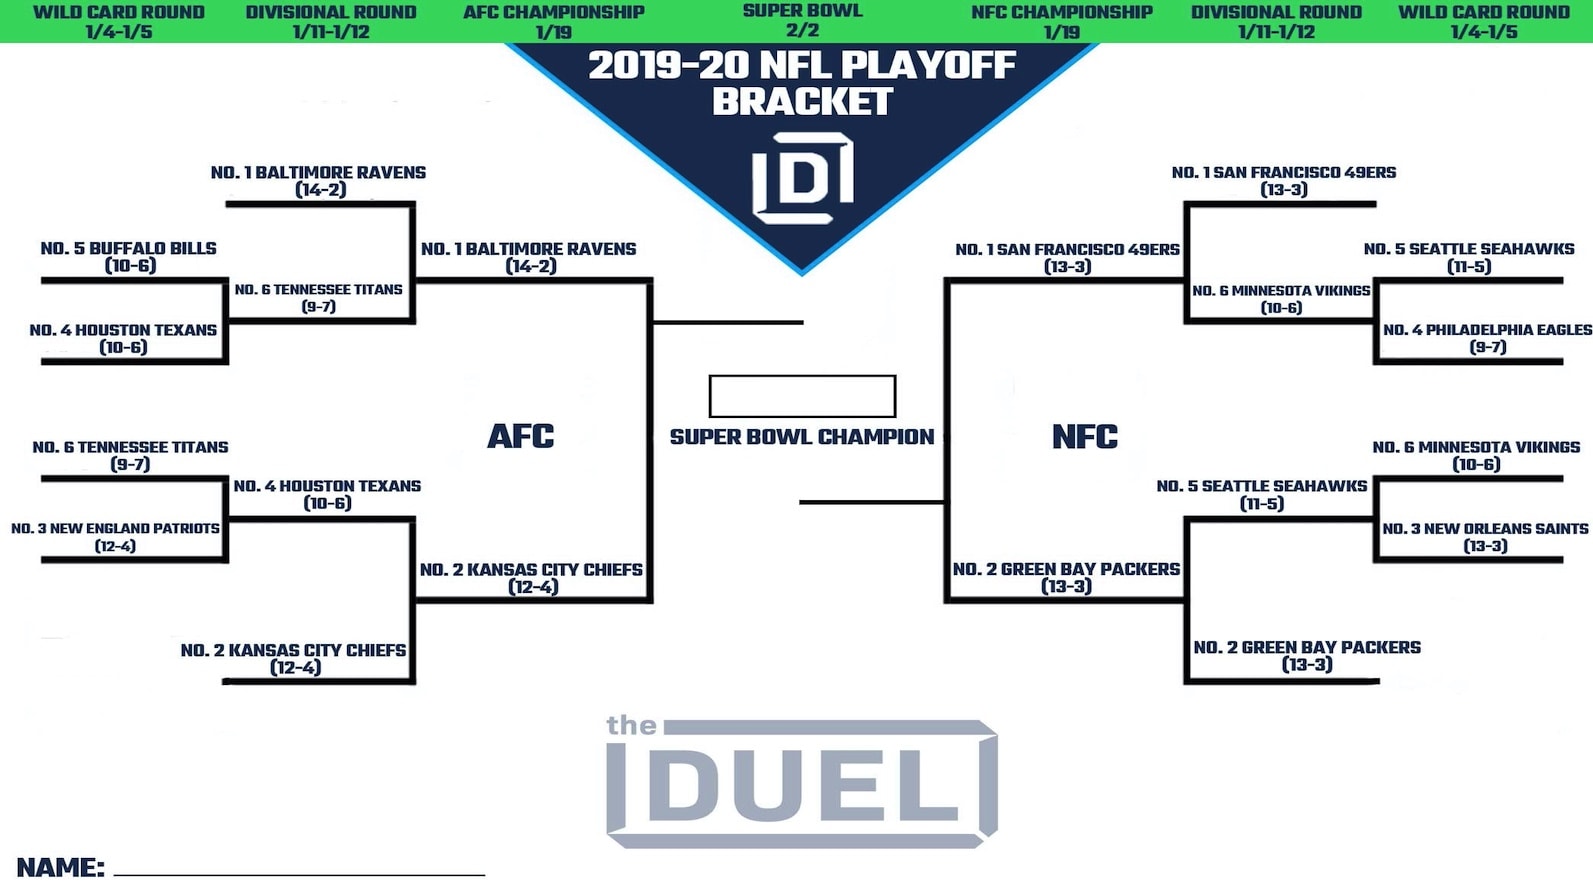 Here's your printable NFL Playoff bracket for the 2020-21 season